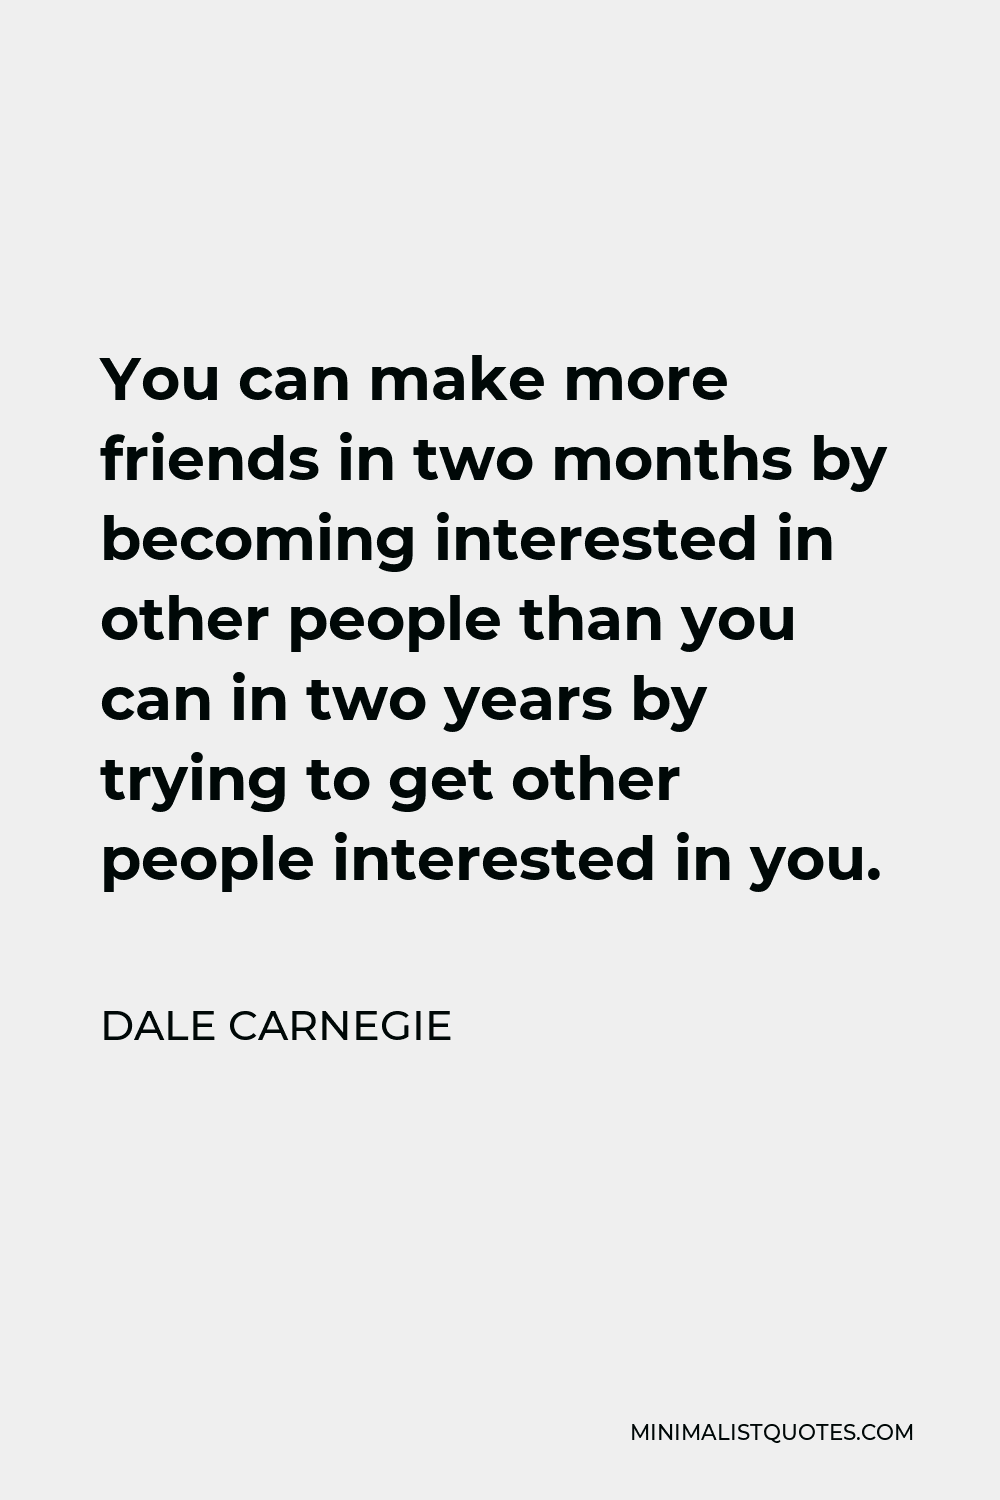 Dale Carnegie Quote - You can make more friends in two months by becoming interested in other people than you can in two years by trying to get other people interested in you.